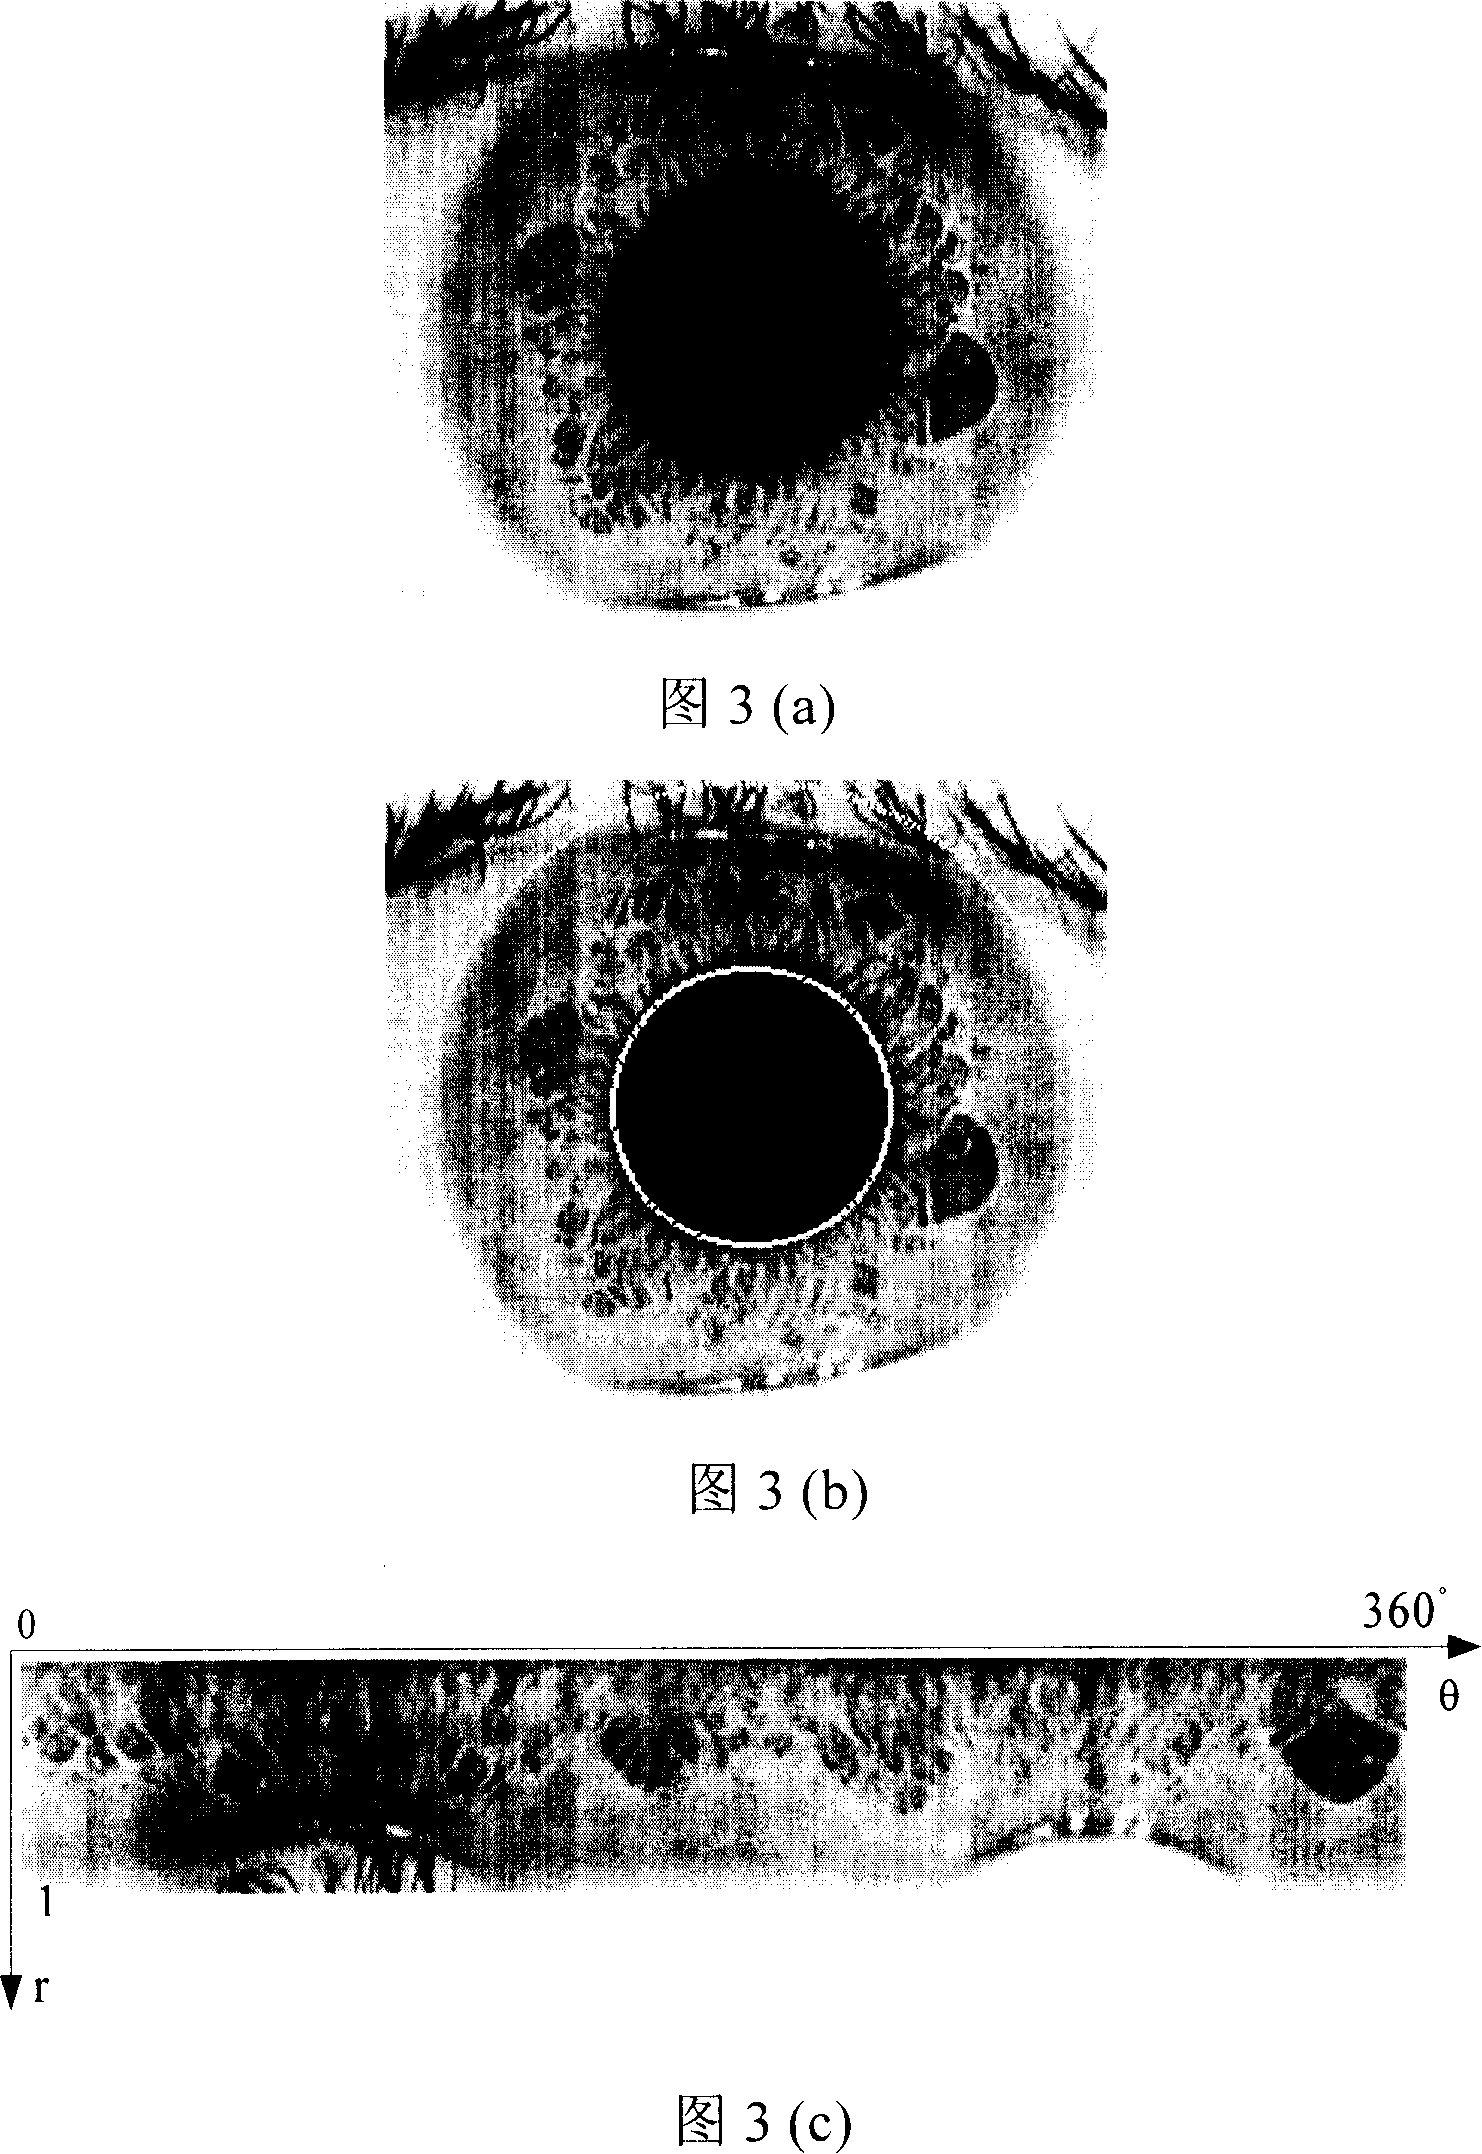 Method for recognizing iris with matched characteristic and graph based on partial bianry mode